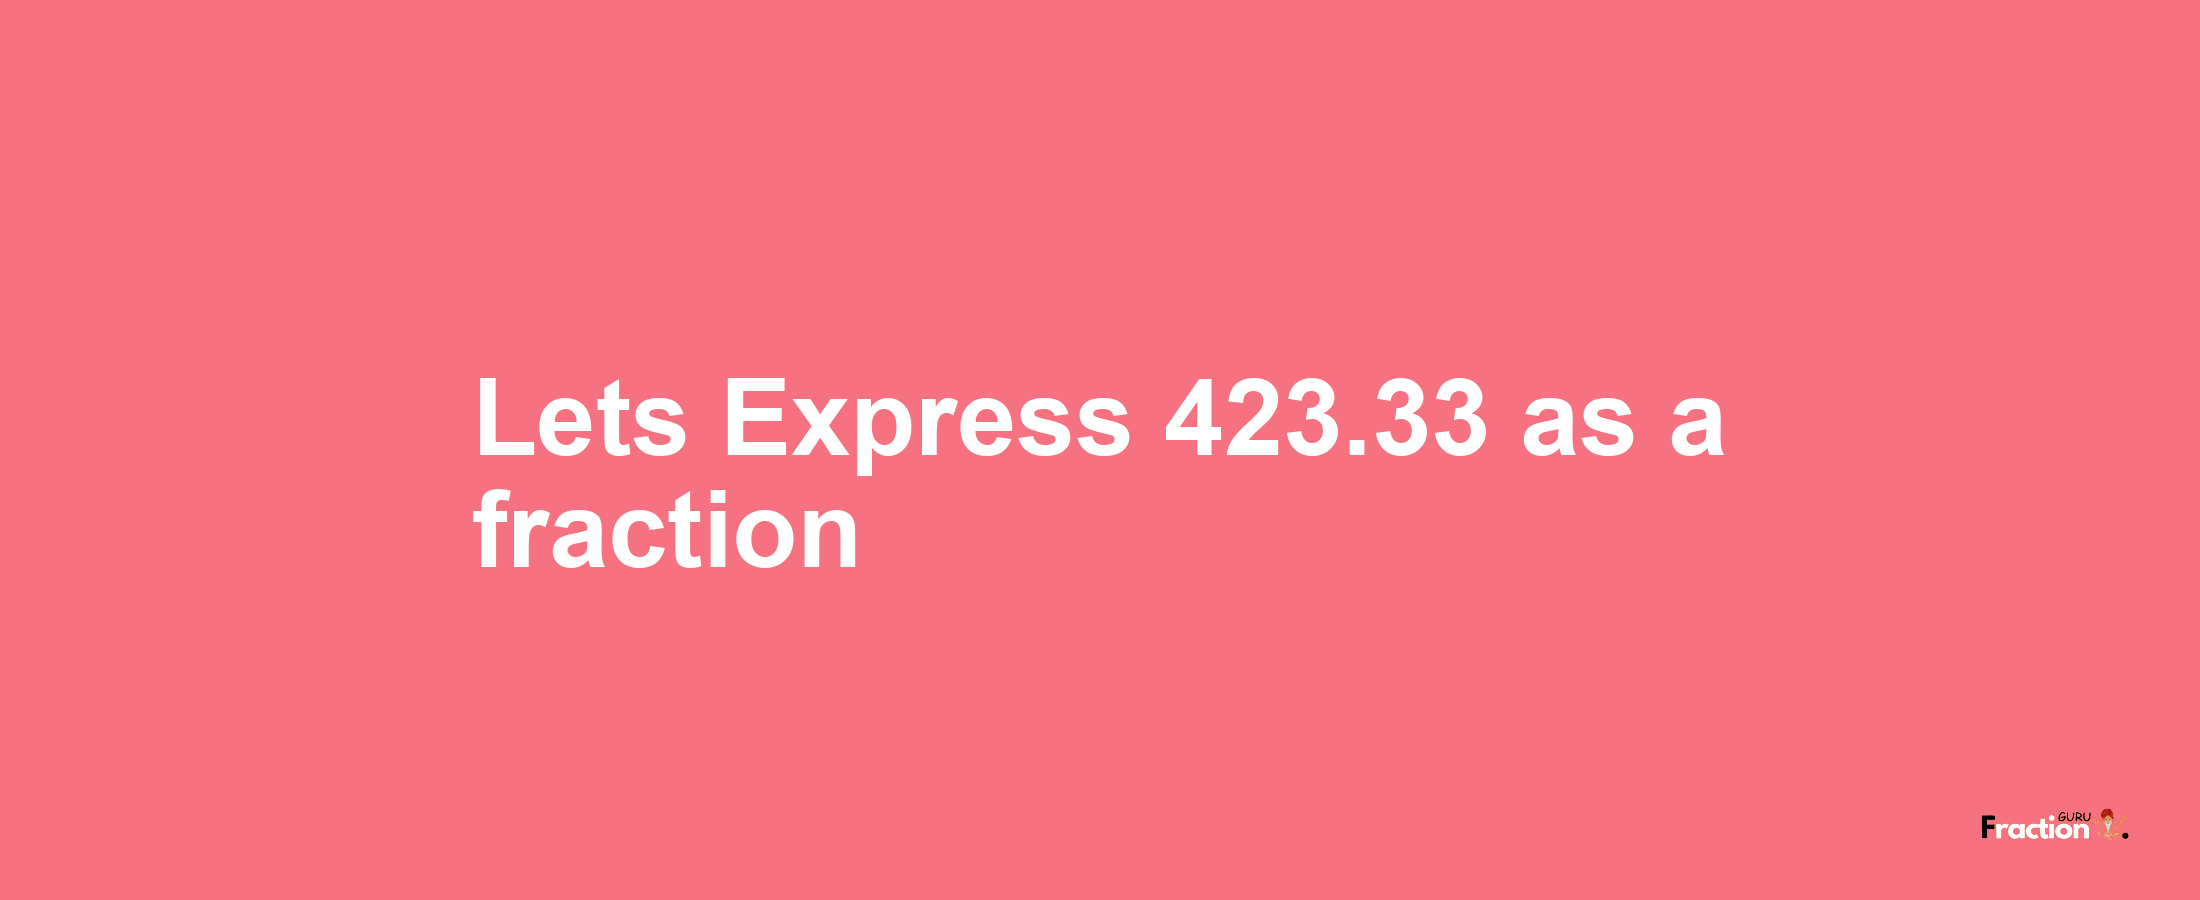 Lets Express 423.33 as afraction